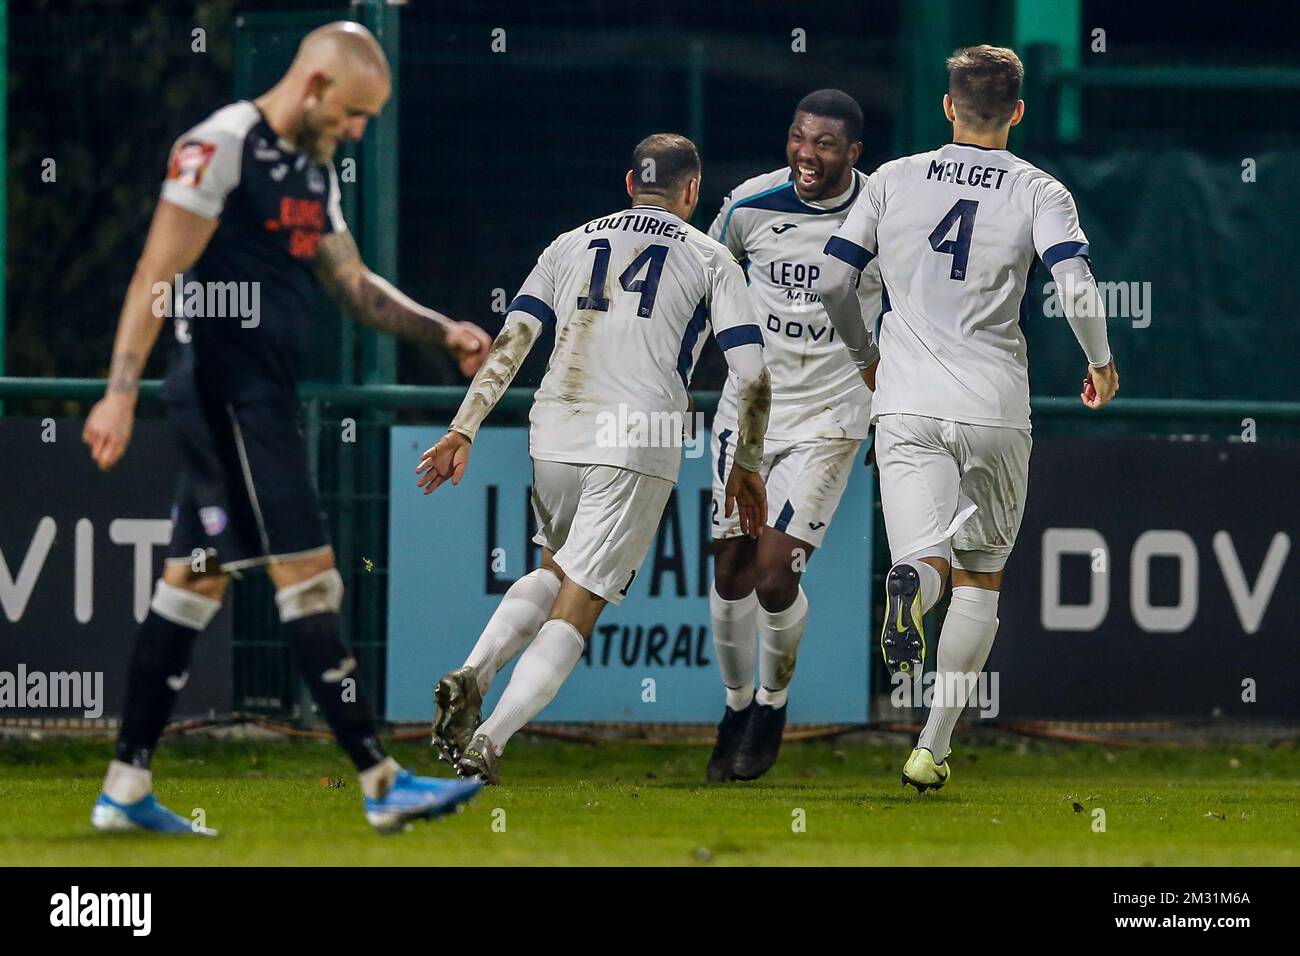 Virton's Stelvio Rosa Da Cruz celebrates after scoring during a soccer game  between RE Virton and KSV Roeselare, Sunday 24 November 2019 in Virton, on  day sixteen of the 'Proximus League' 1B